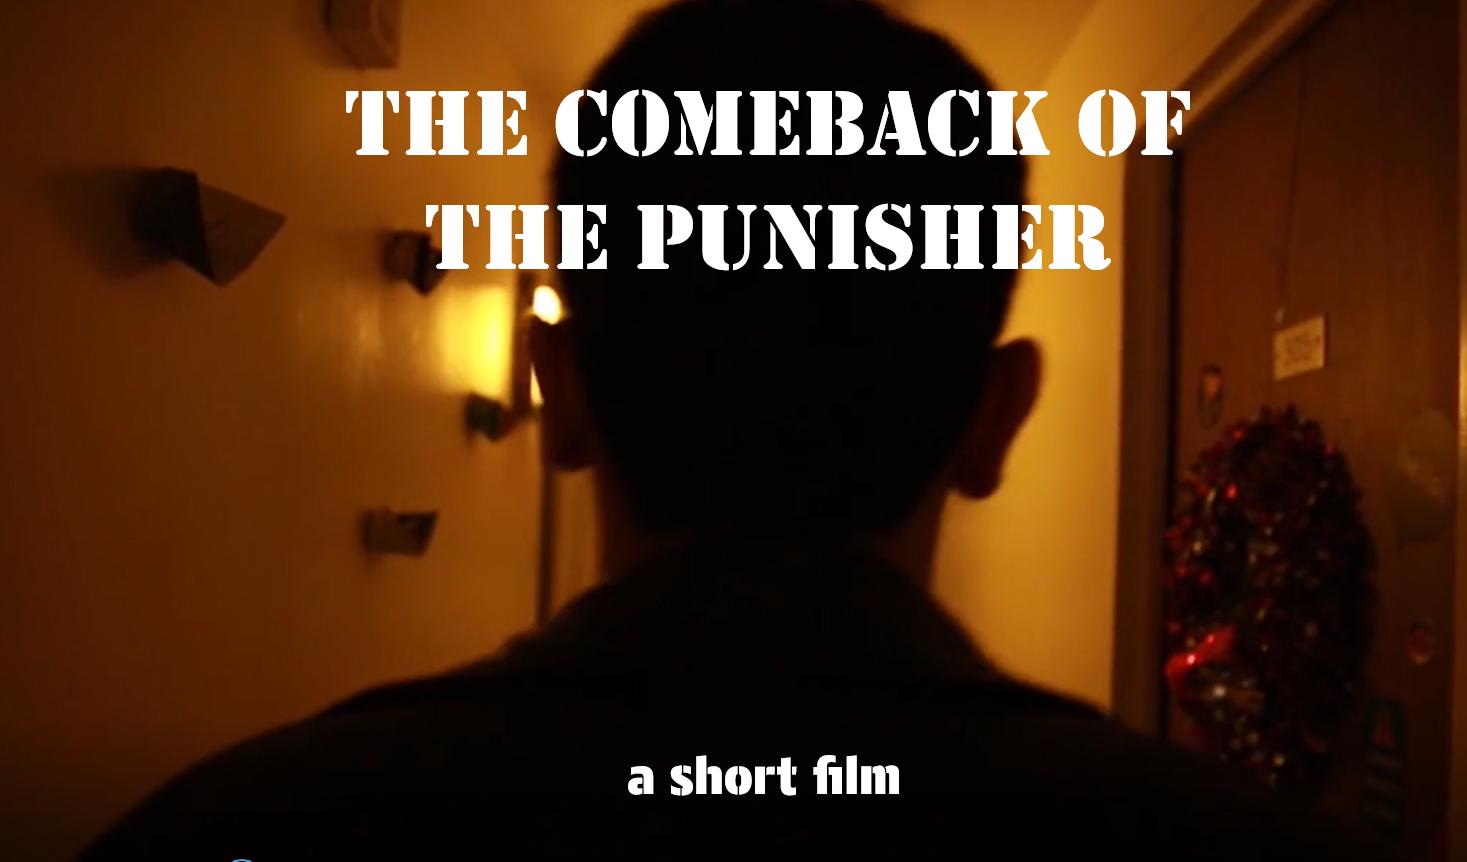 The Comeback of the Punisher